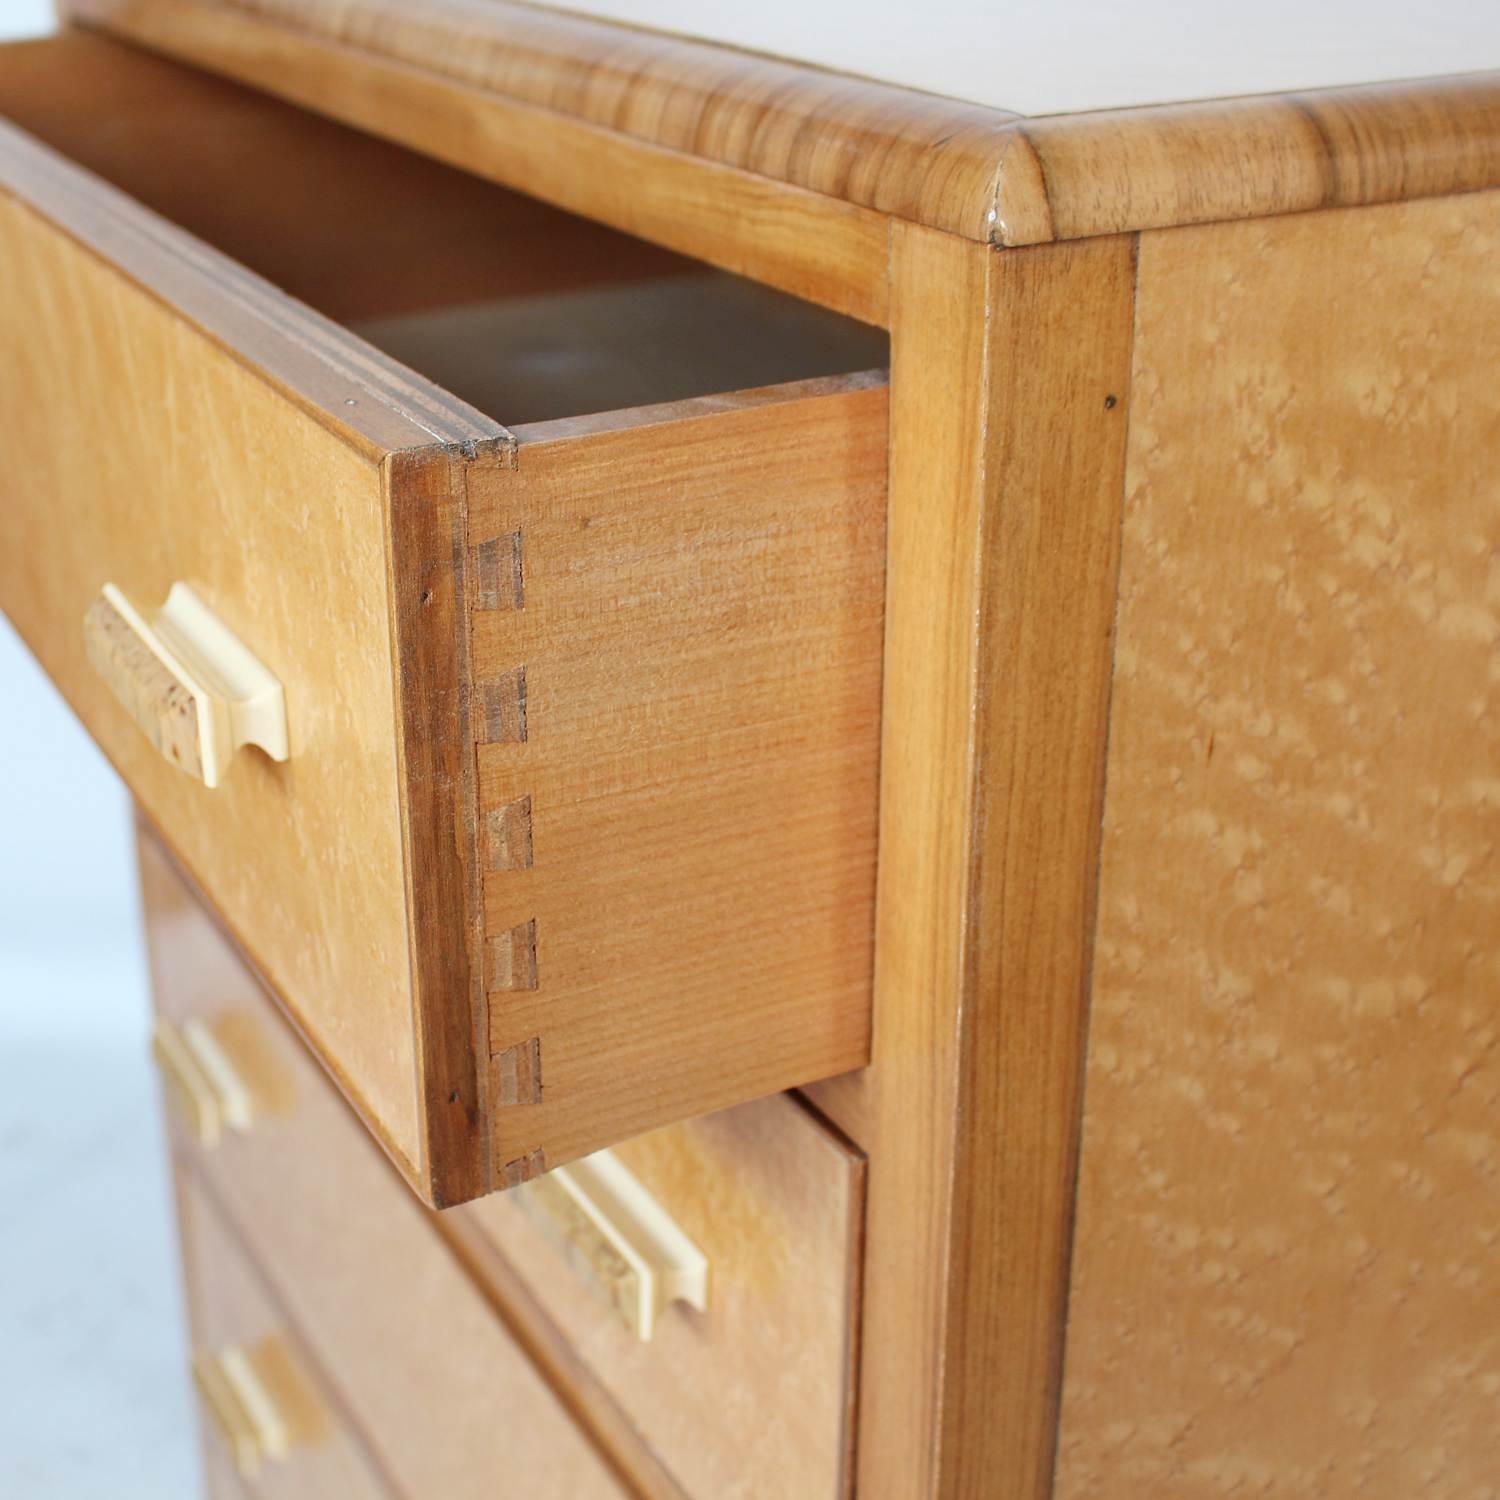 An Art Deco chest of drawers in figured bird's-eye maple with walnut banding and original bi-colored bakelite handles.